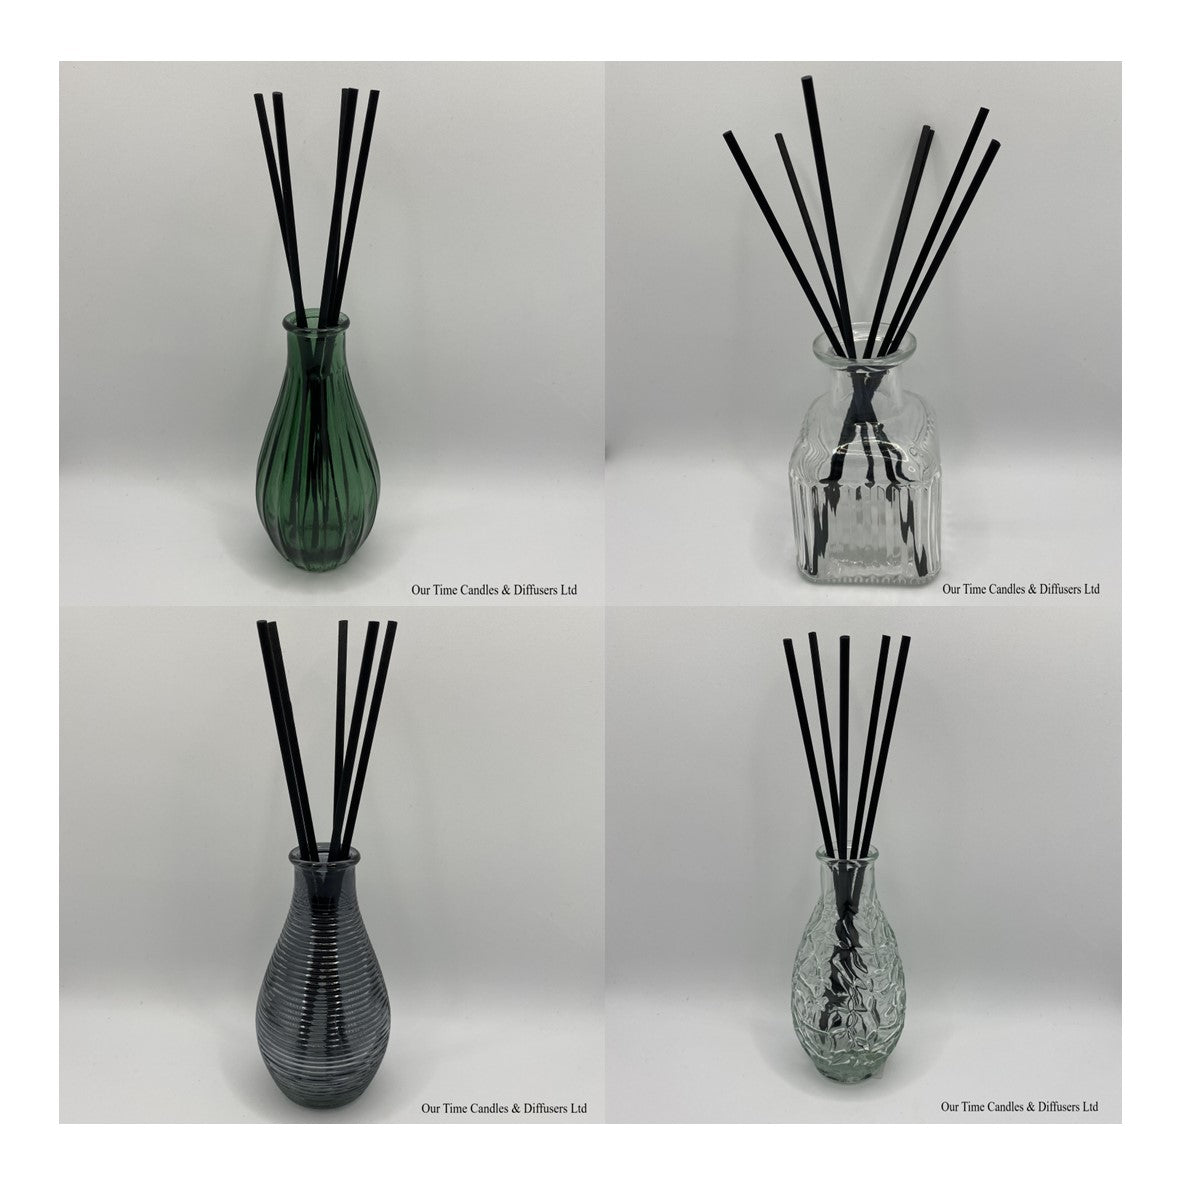 Diffuser Vases from Our Time Candles and Diffusers